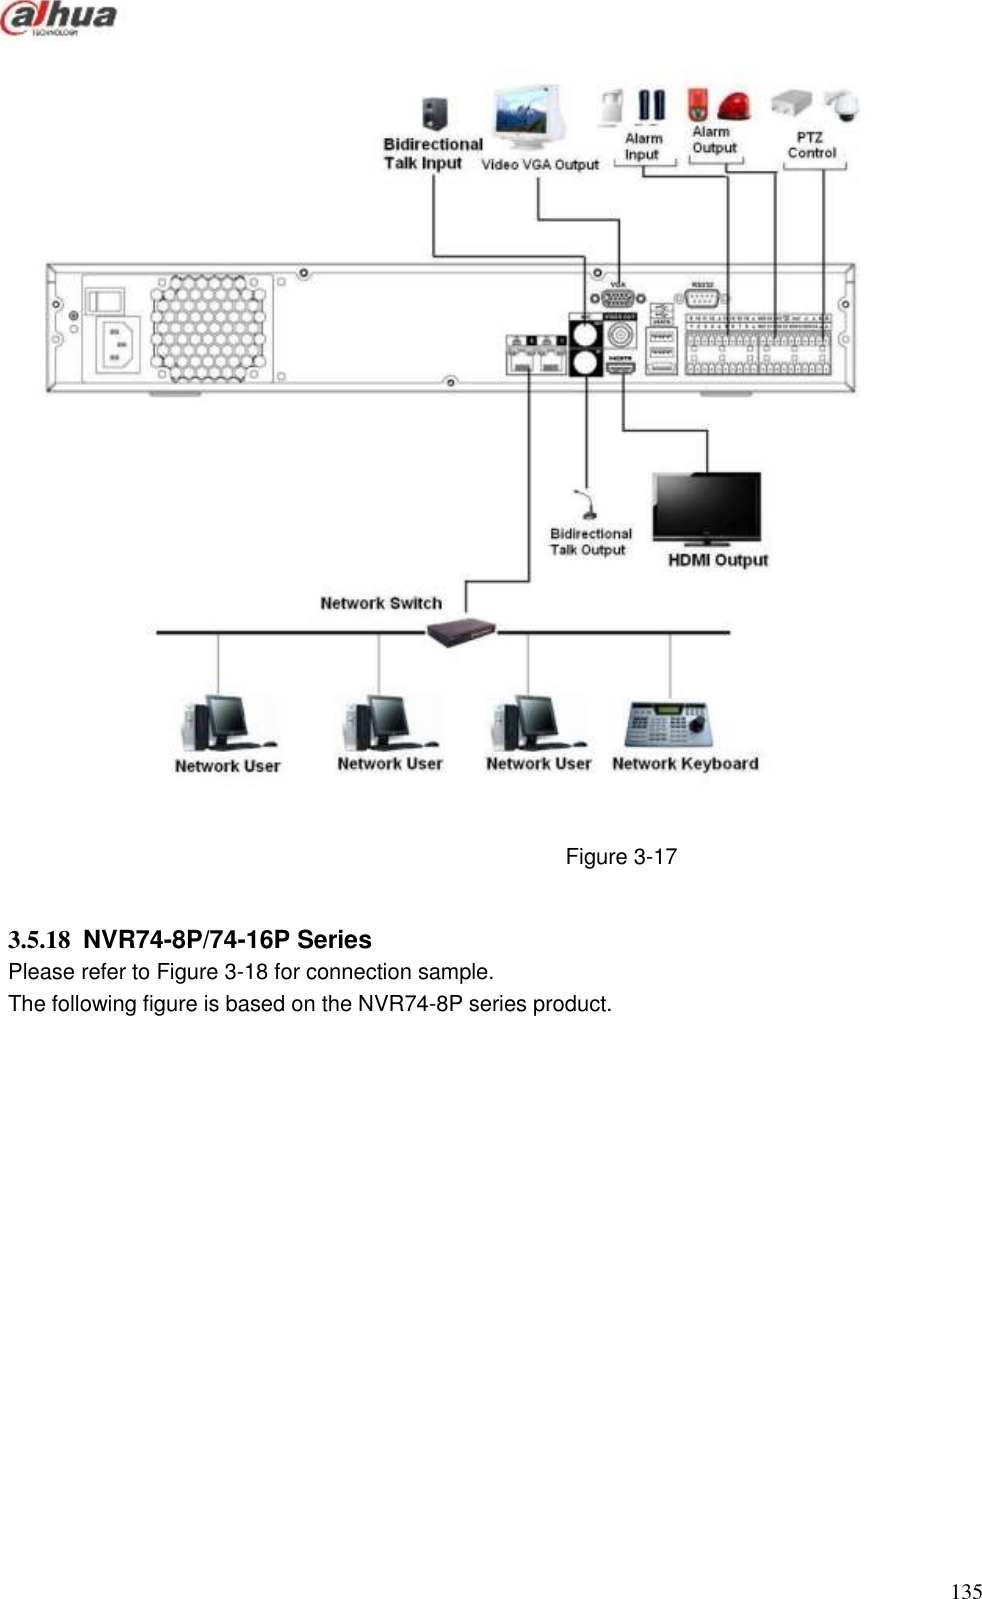  135   Figure 3-17  3.5.18  NVR74-8P/74-16P Series   Please refer to Figure 3-18 for connection sample. The following figure is based on the NVR74-8P series product.    